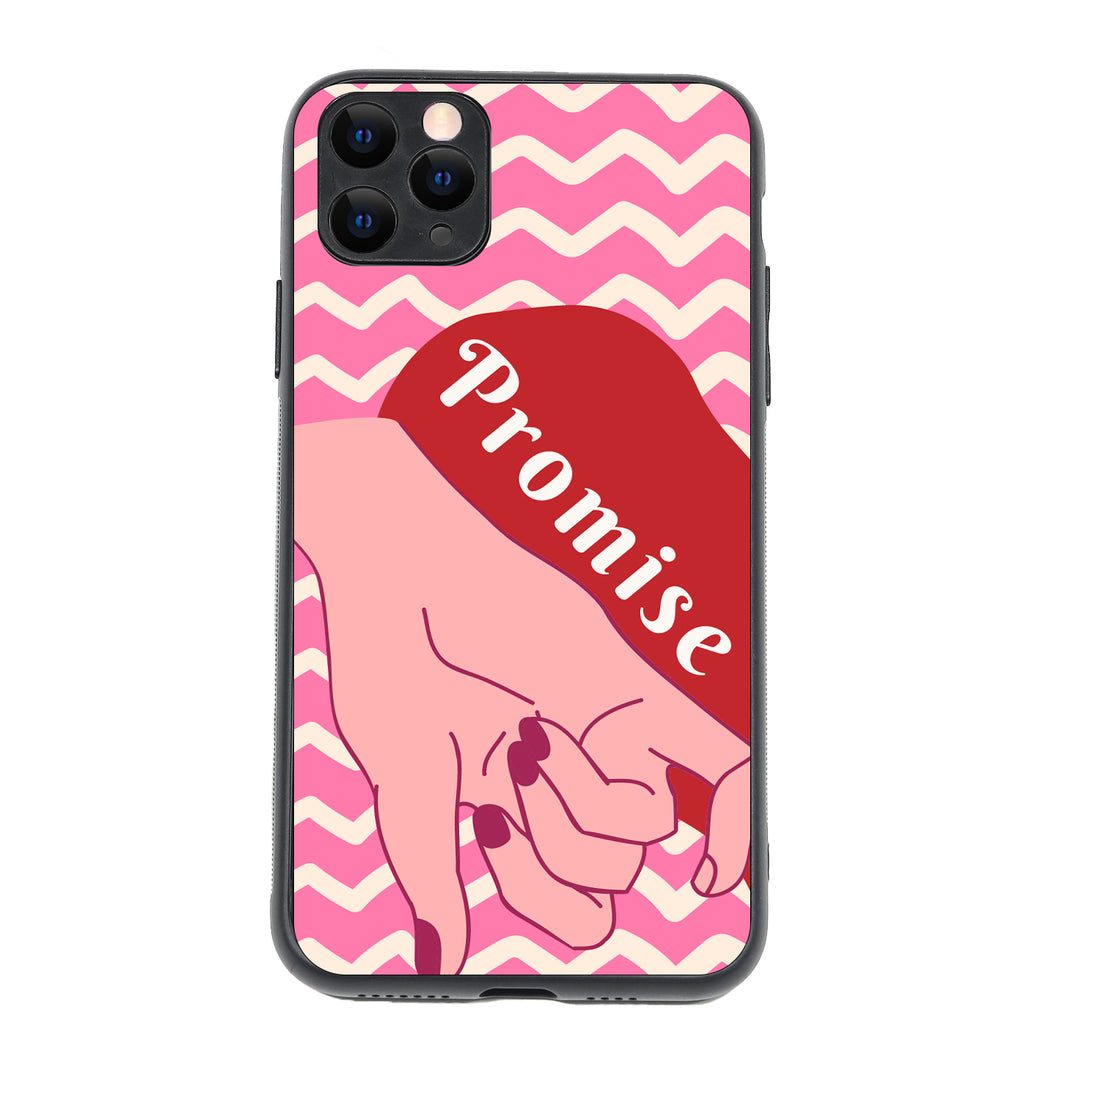 Promise Forever Girl Couple iPhone 11 Pro Max Case